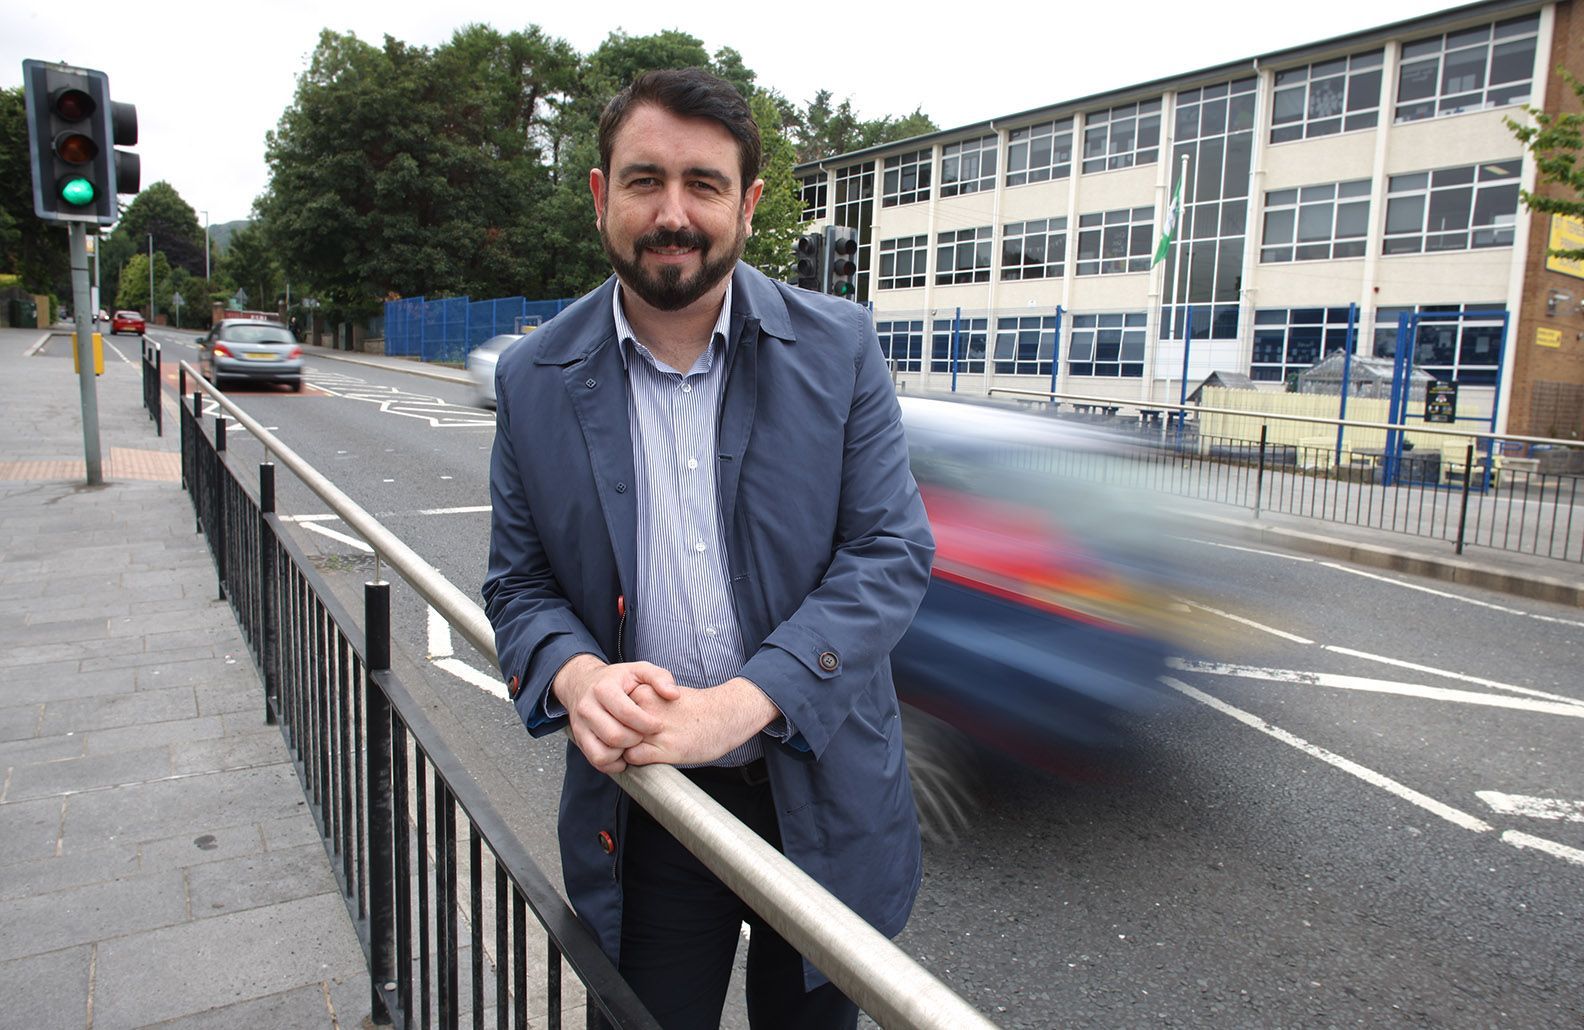 SAFETY: The SDLP\'s Paul Doherty said that we need to take greater care when driving and look out for pedestrians, cyclists and vulnerable other road users